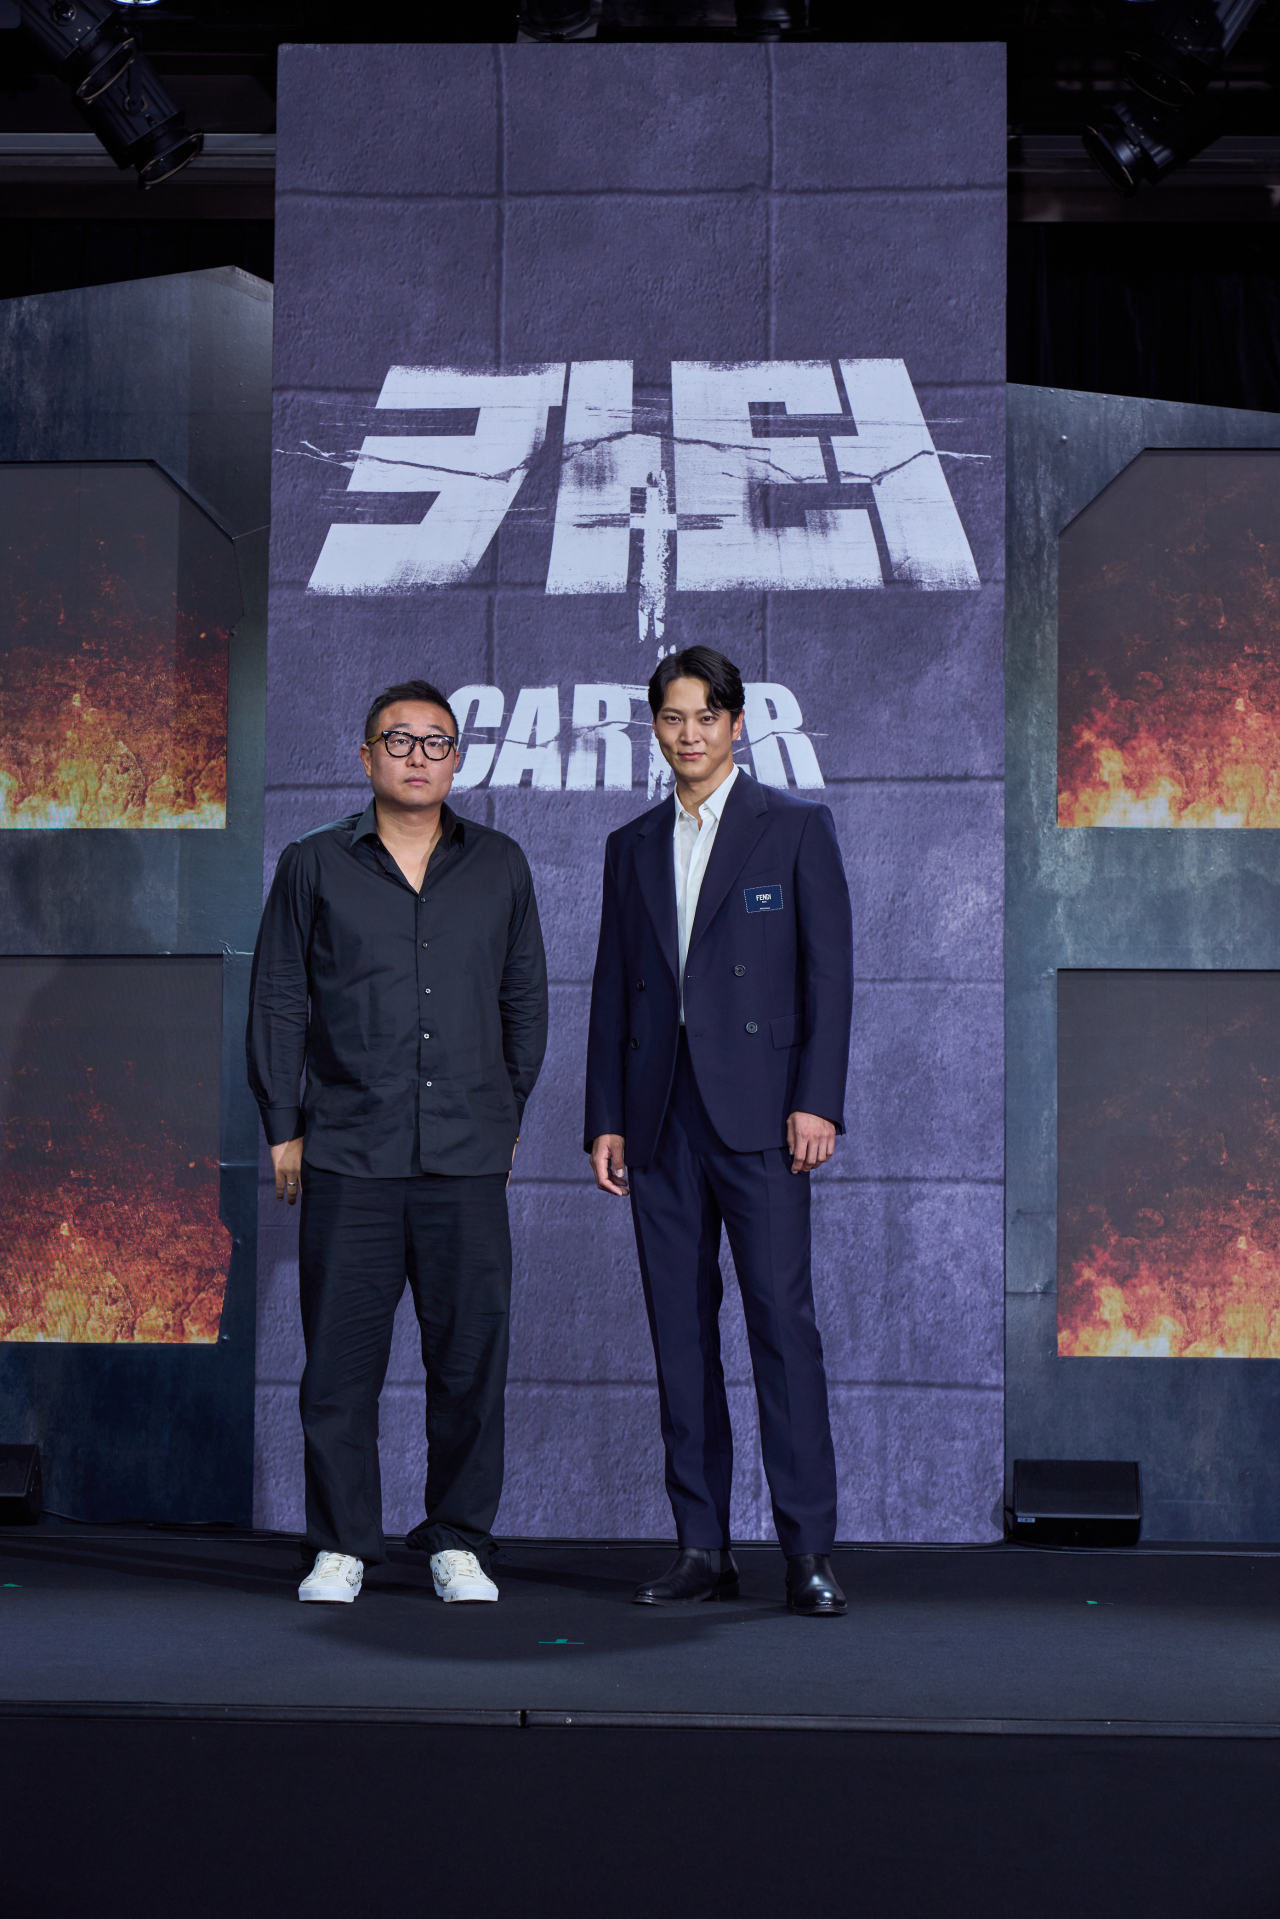 “Carter” director Jung Byung-gil (left) and actor Joo Won pose for photos before a press conference held at JW Marriott Dongdaemun Square Seoul on Tuesday. (Netflix)